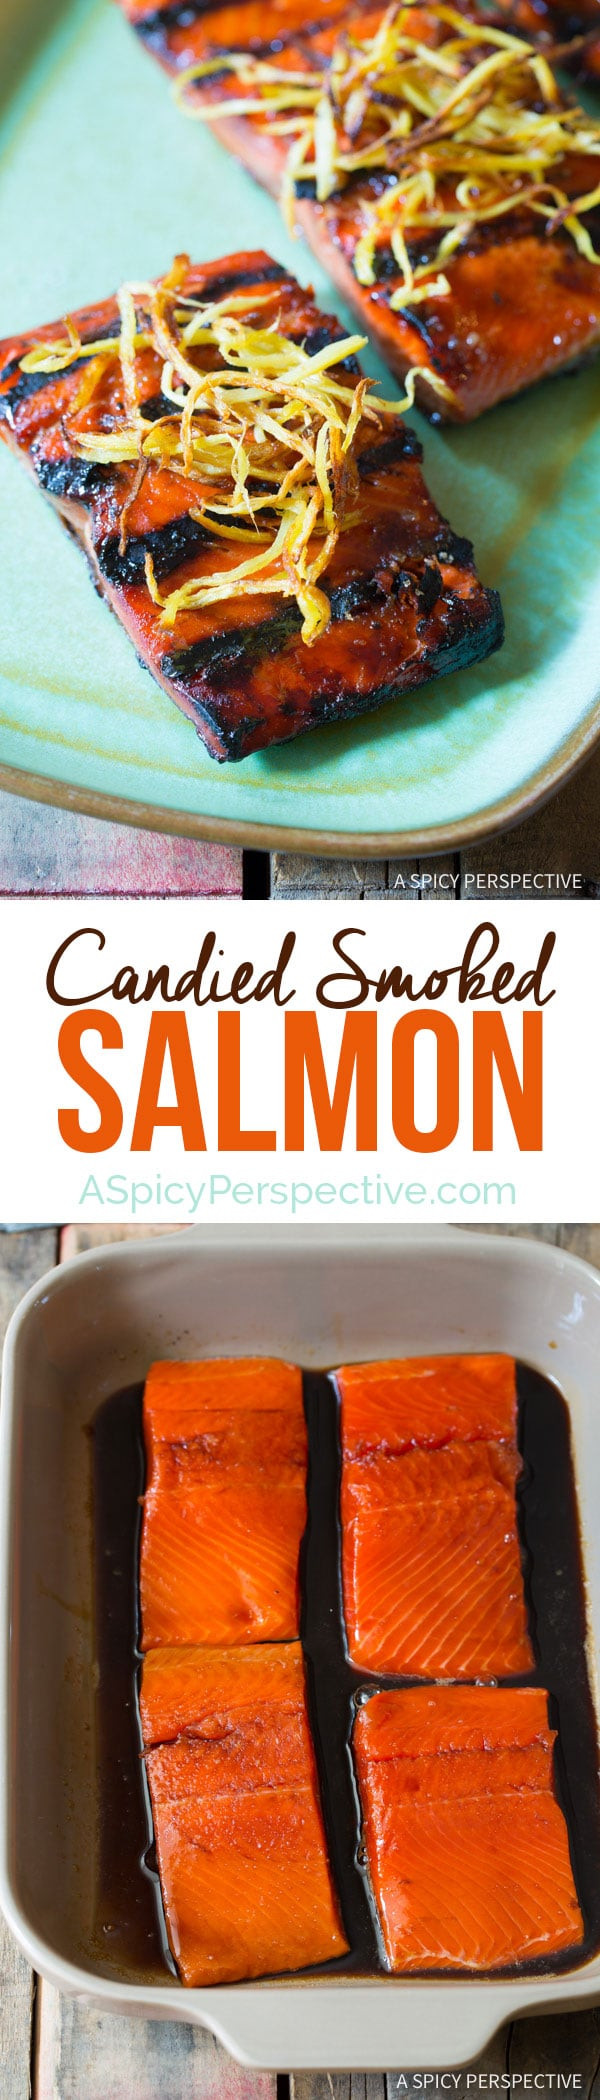 Candied Smoked Salmon
 Can d Smoked Salmon Recipe A Spicy Perspective